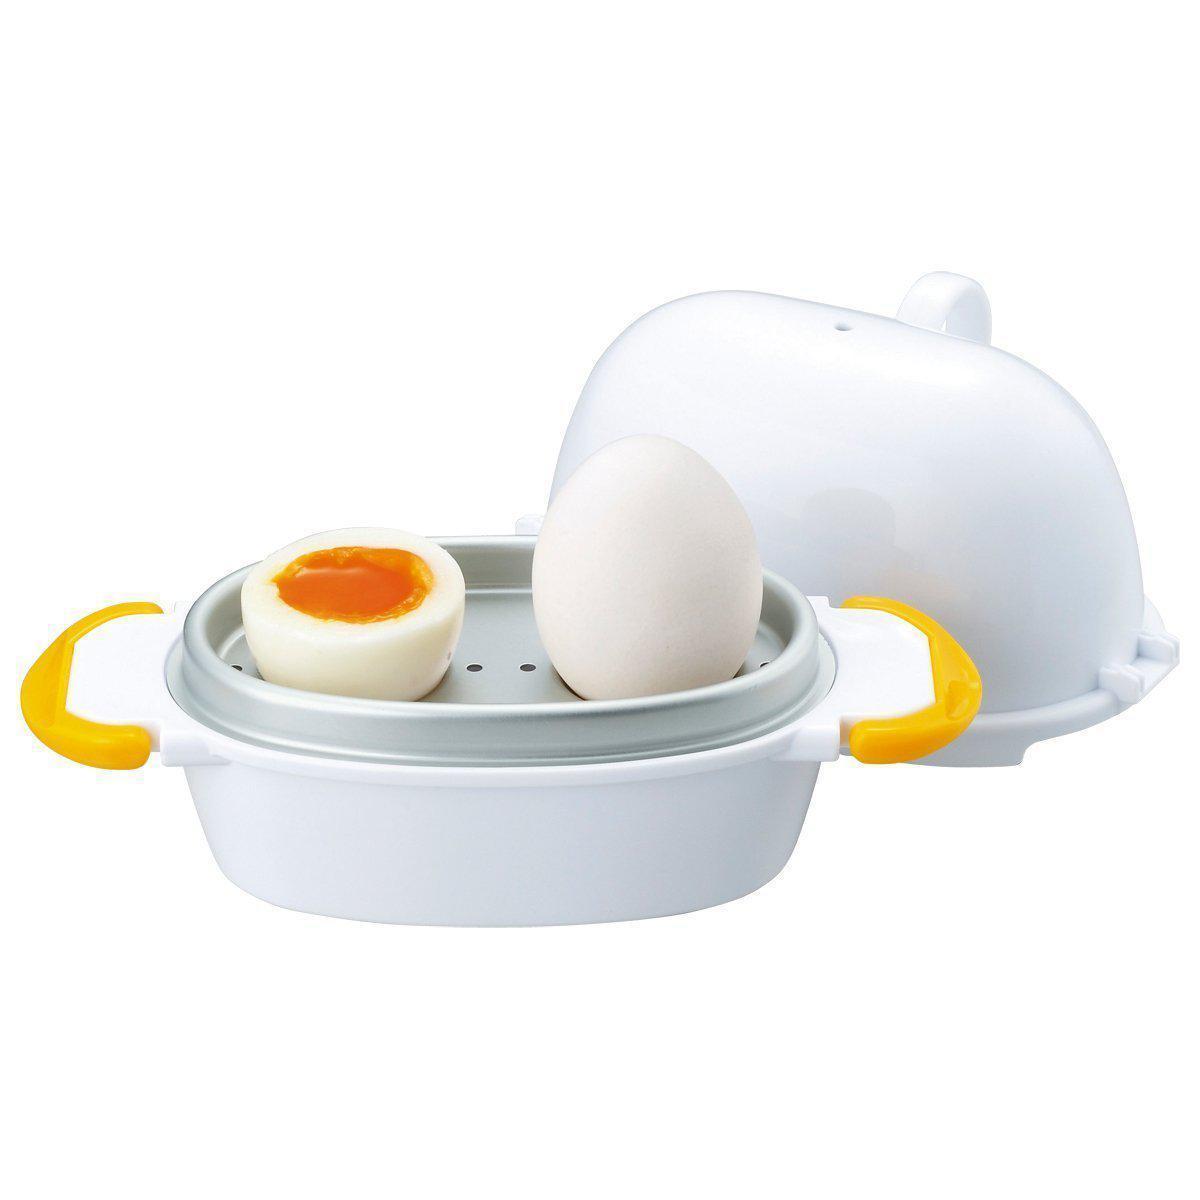 Easy Eggwich Microwave Egg Cooker, 2 count